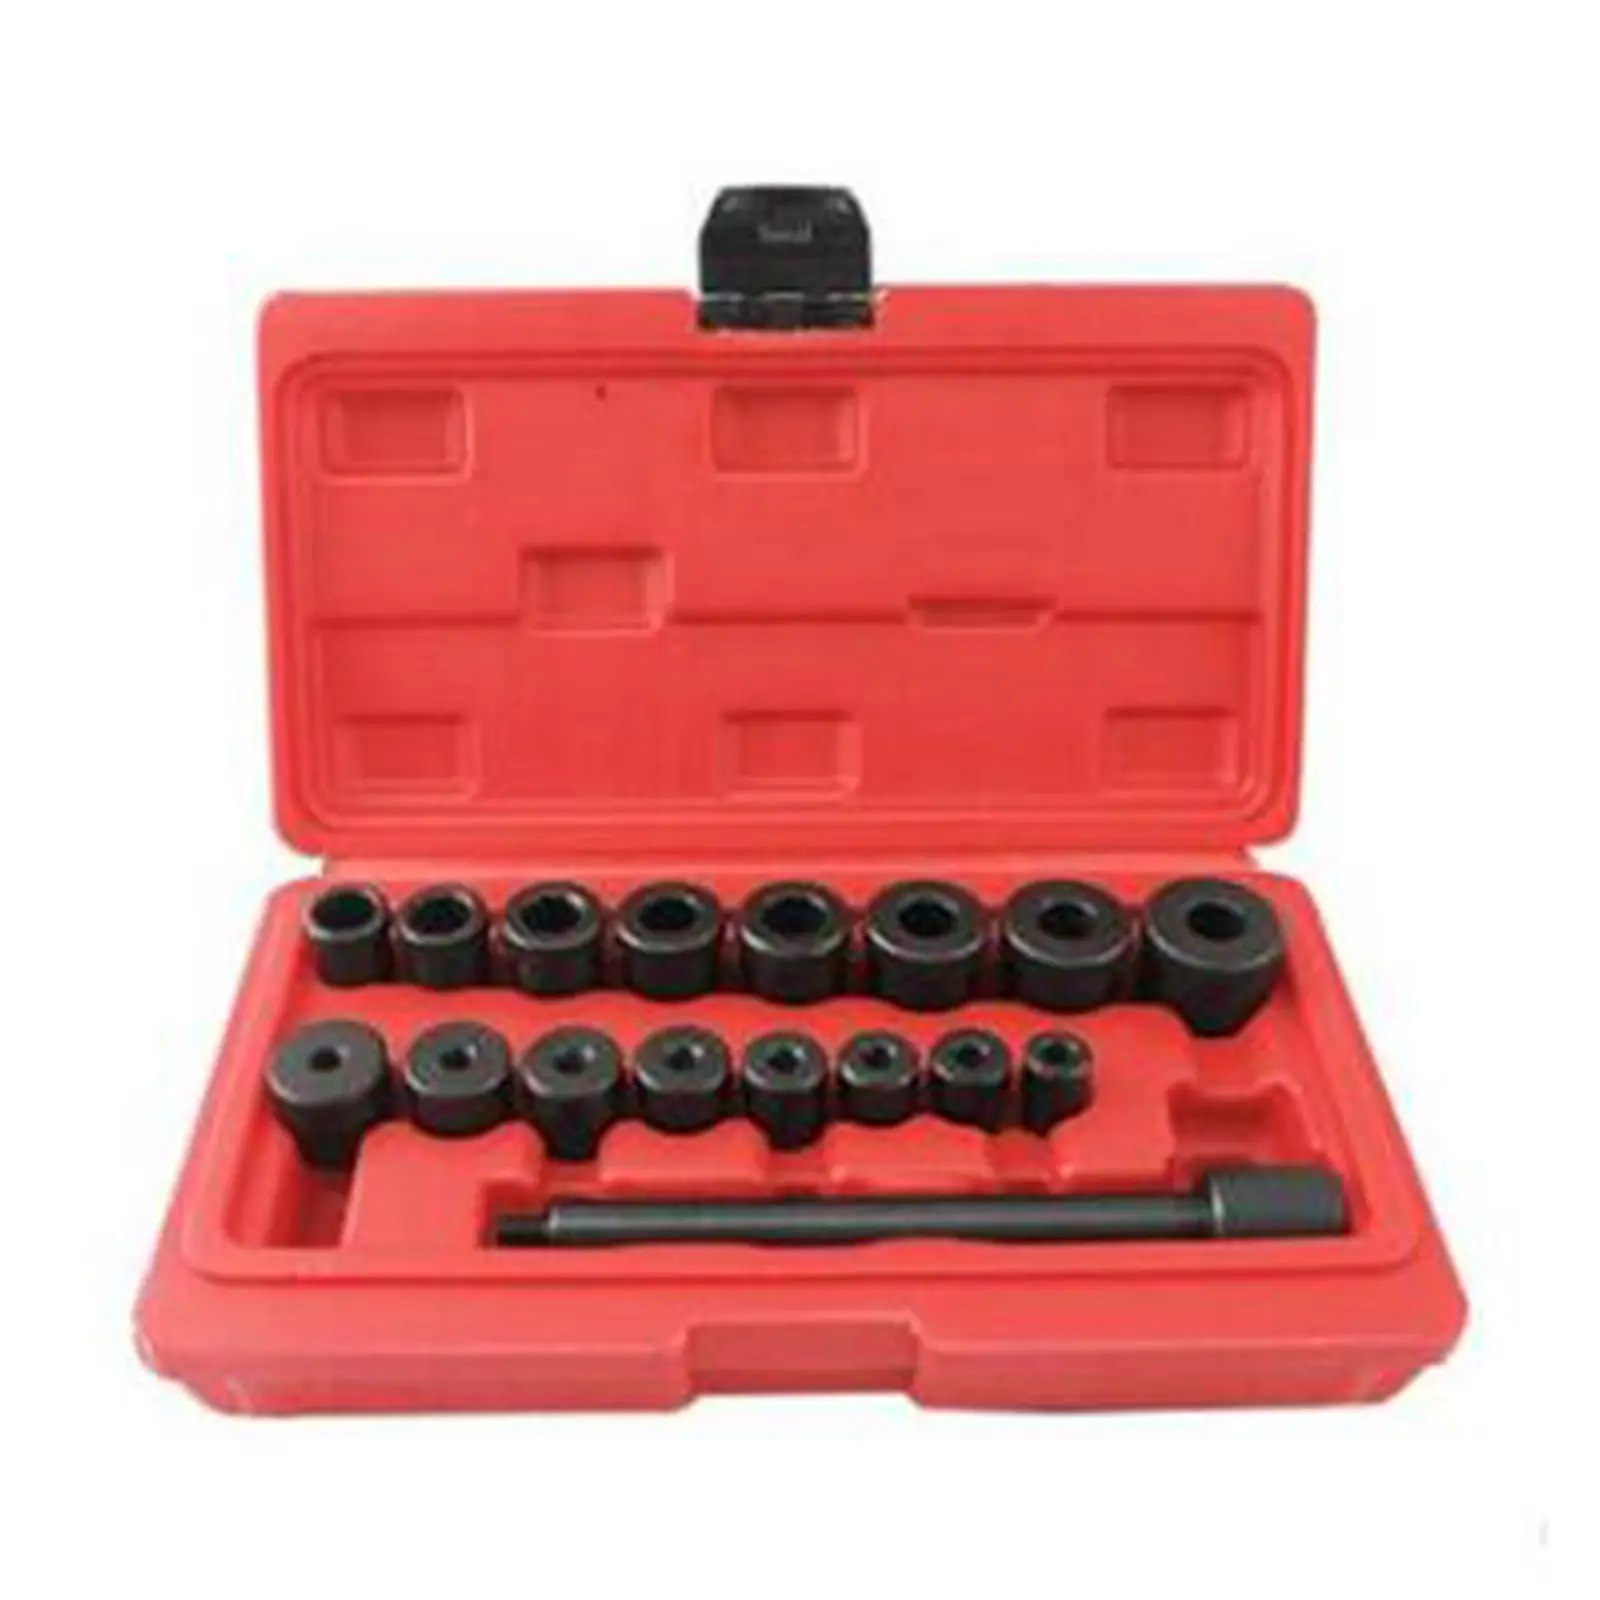 17Pcs/set Clutch Aligning Kit Installation Calibration Clutch Hole Clutch Drive Plate Aligning Tool for Car Truck Vehicles